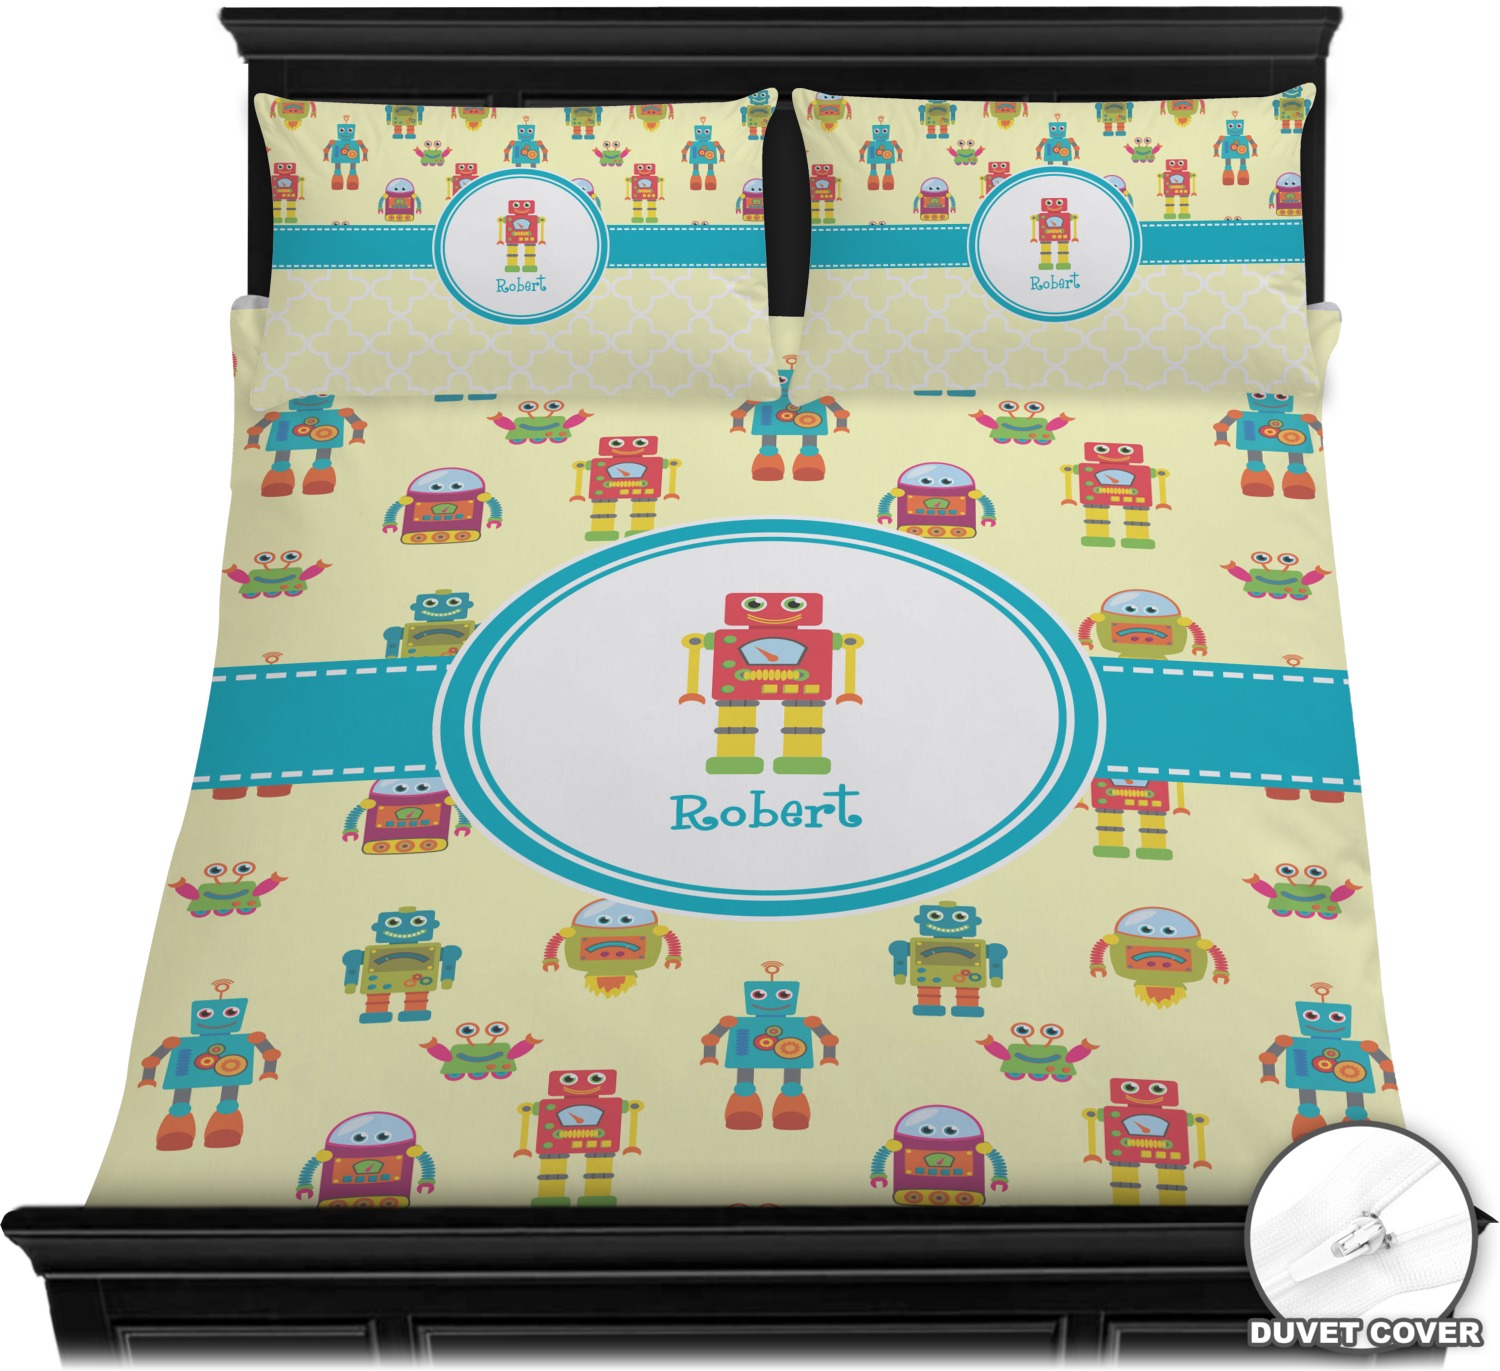 Robot Duvet Covers Personalized Youcustomizeit